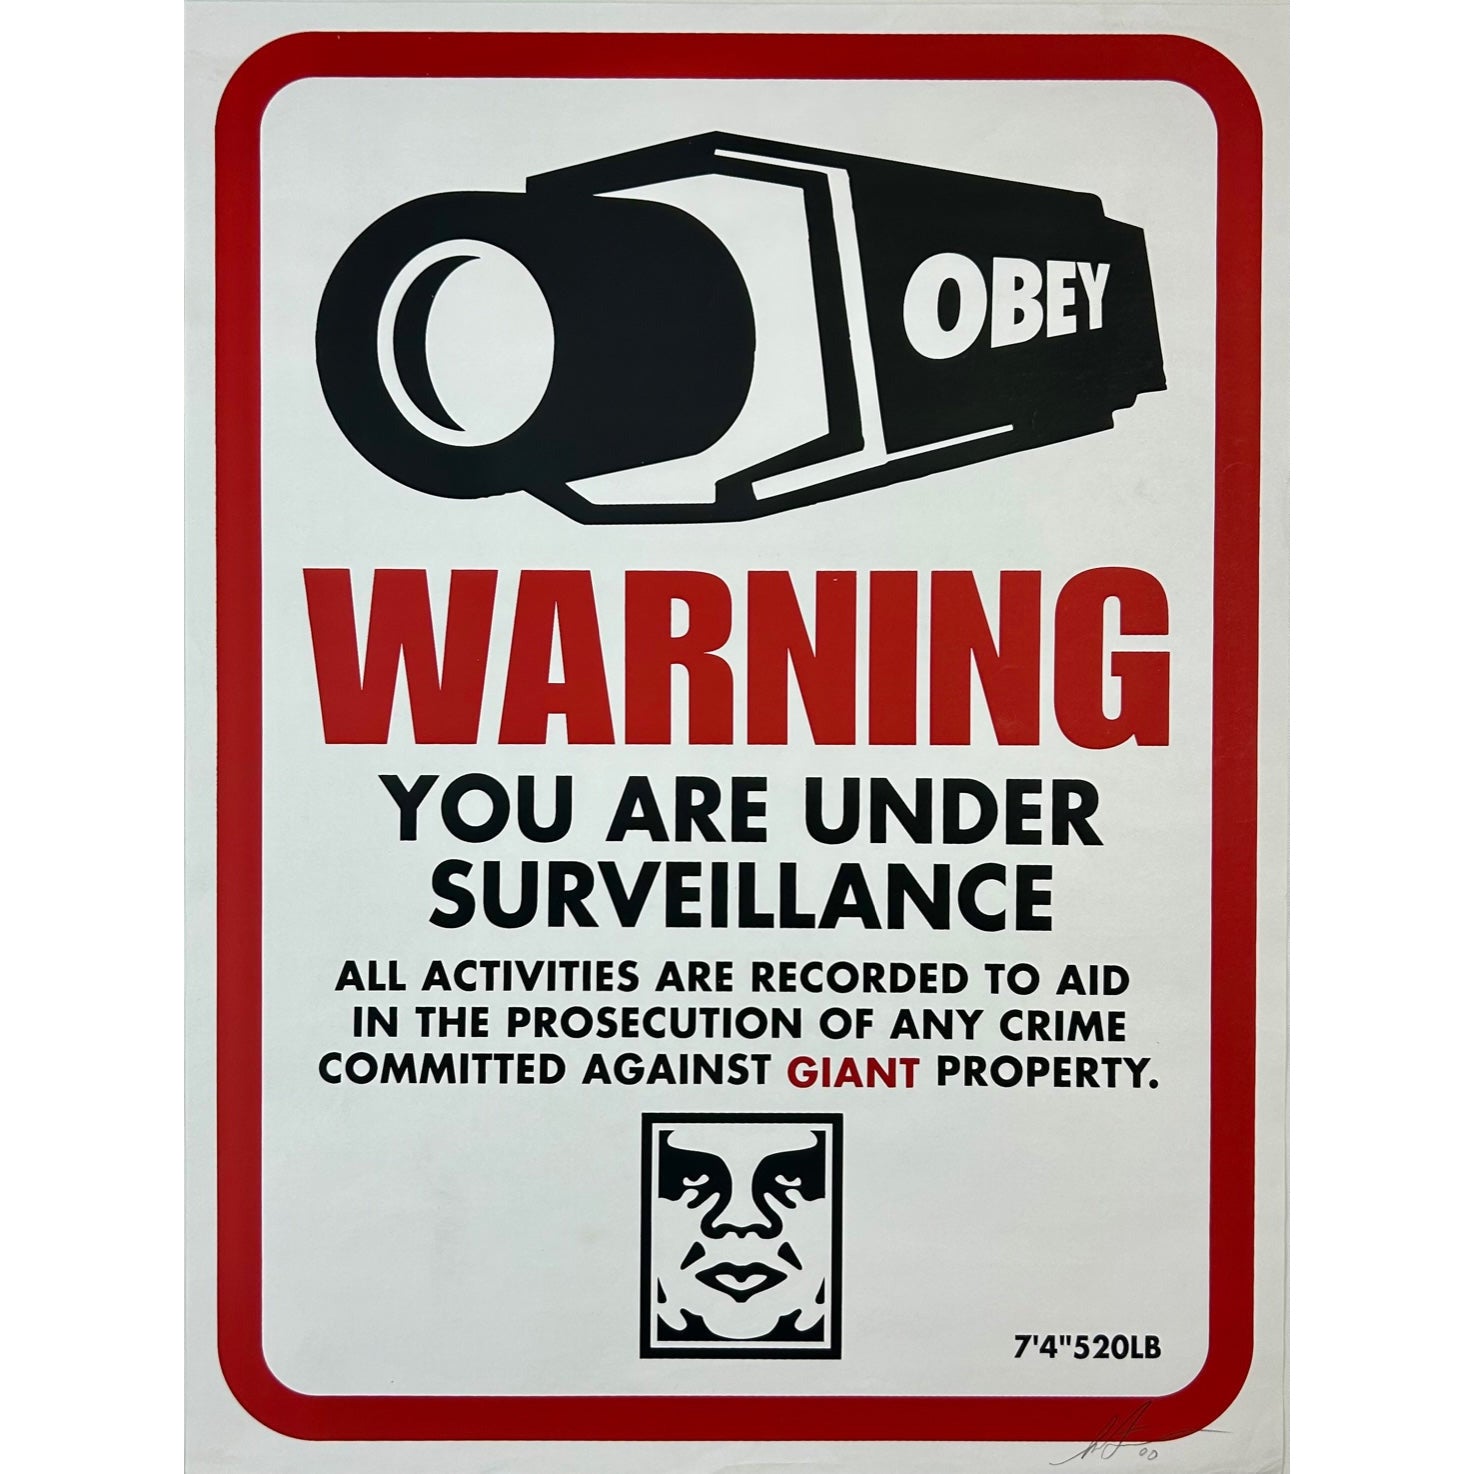 SHEPARD FAIREY (OBEY GIANT) - 2000 - WARNING SURVEILLANCE (SIGNED PASTER)